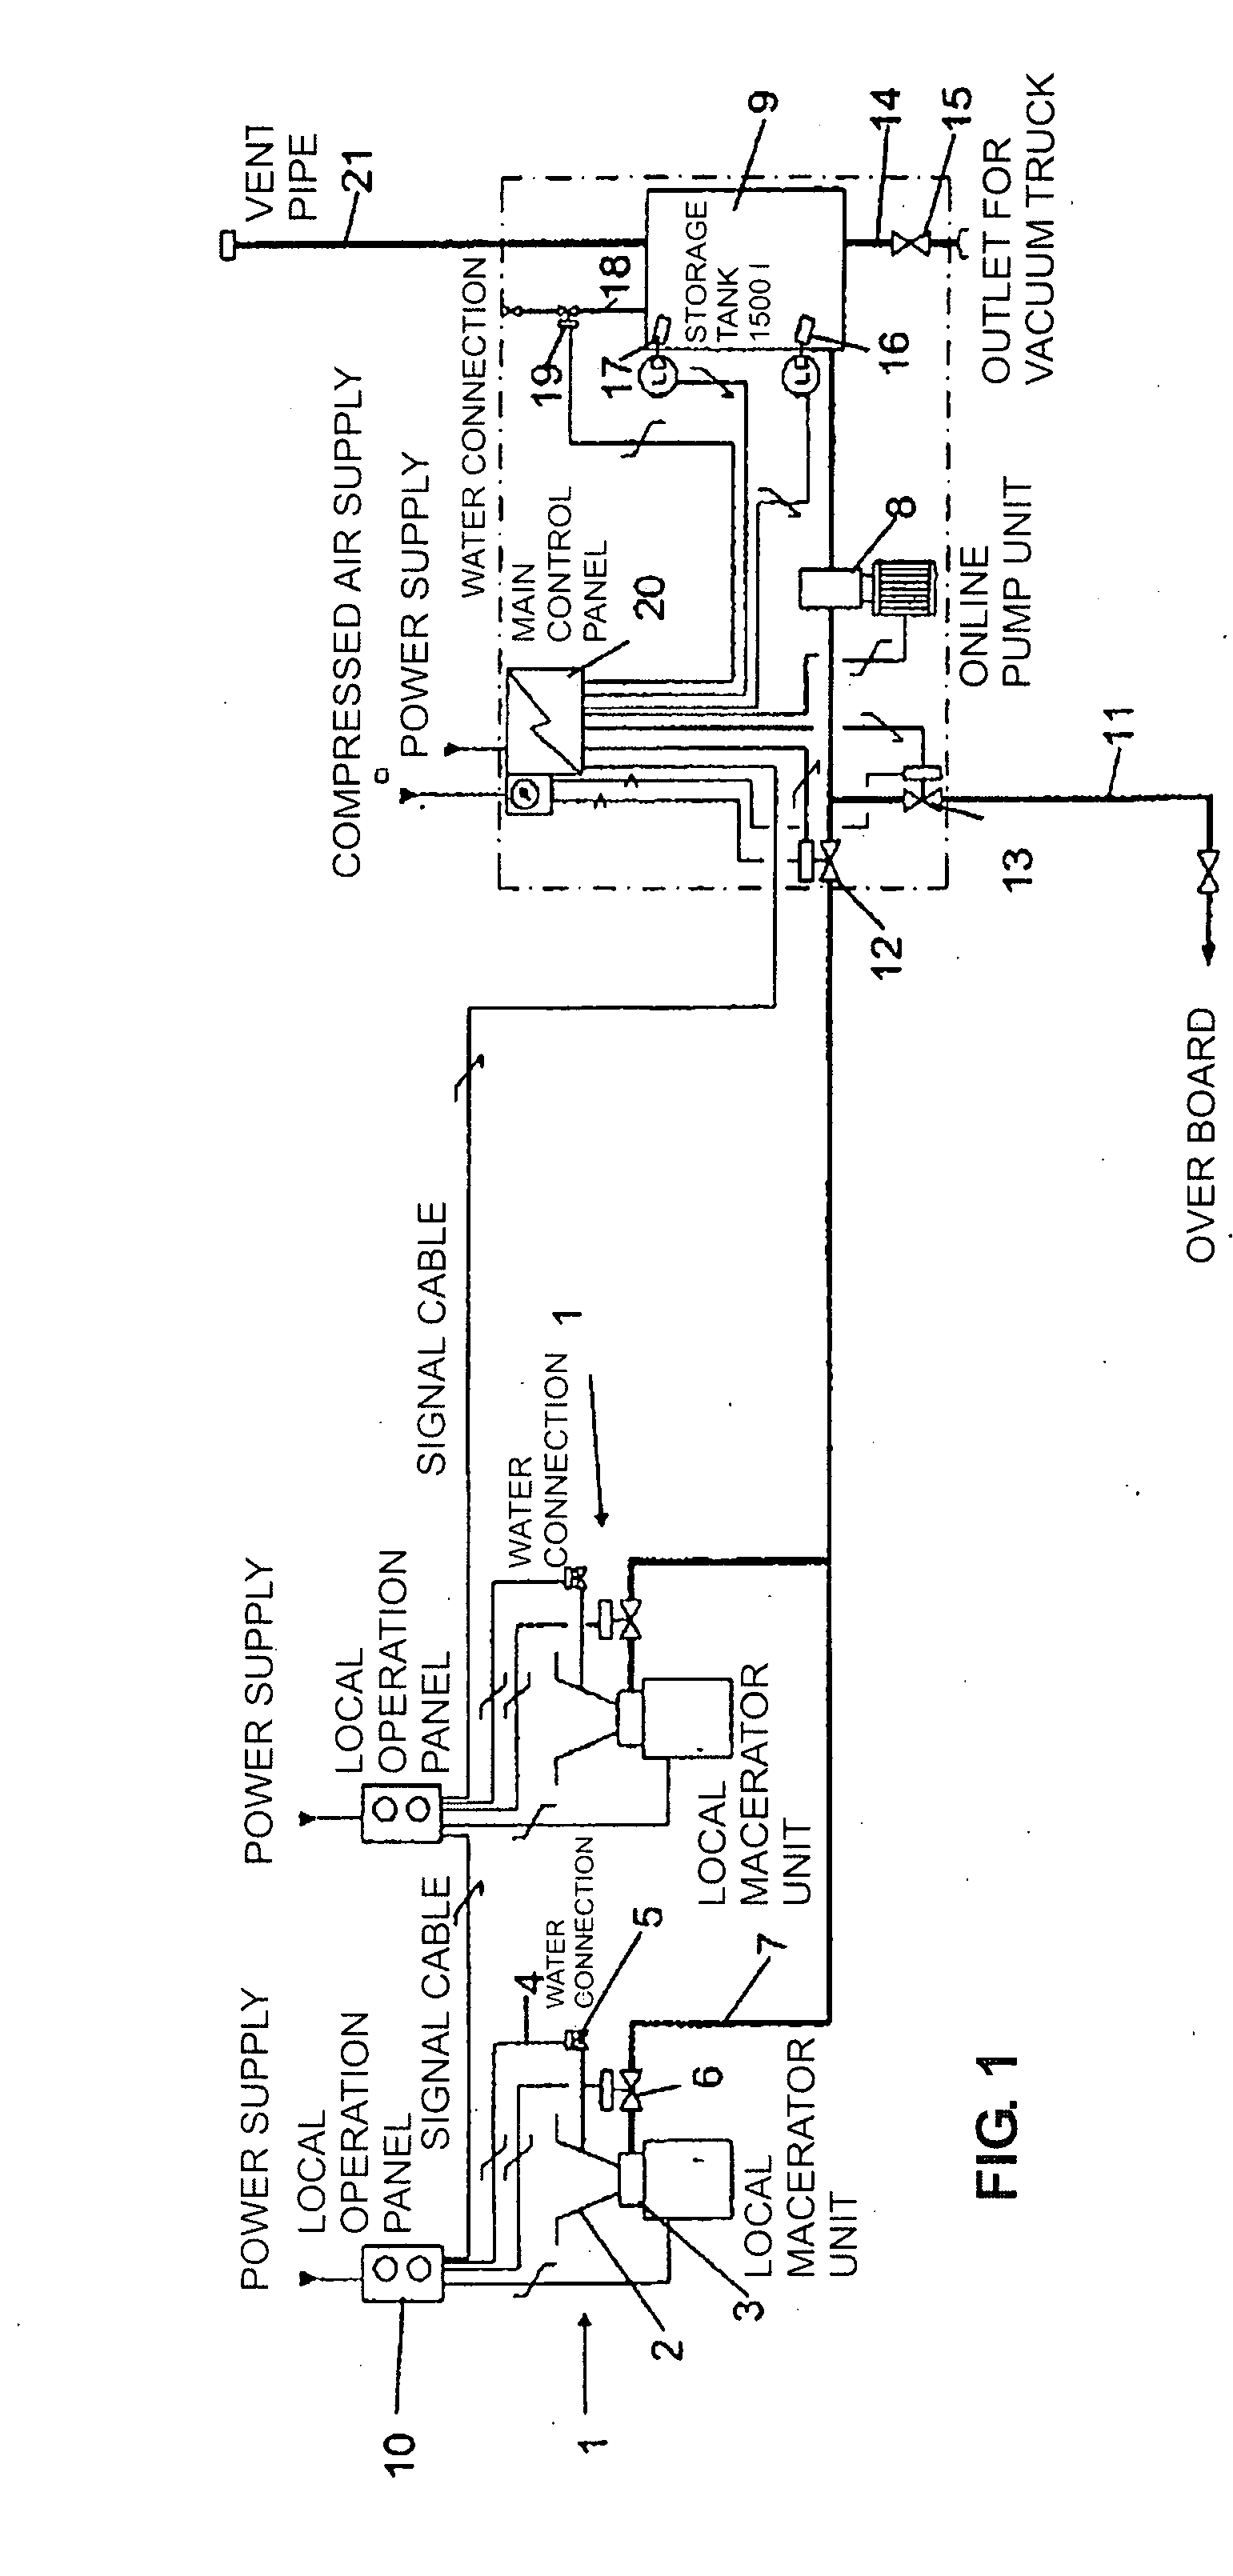 Method and apparatus for transferring and collecting waste material